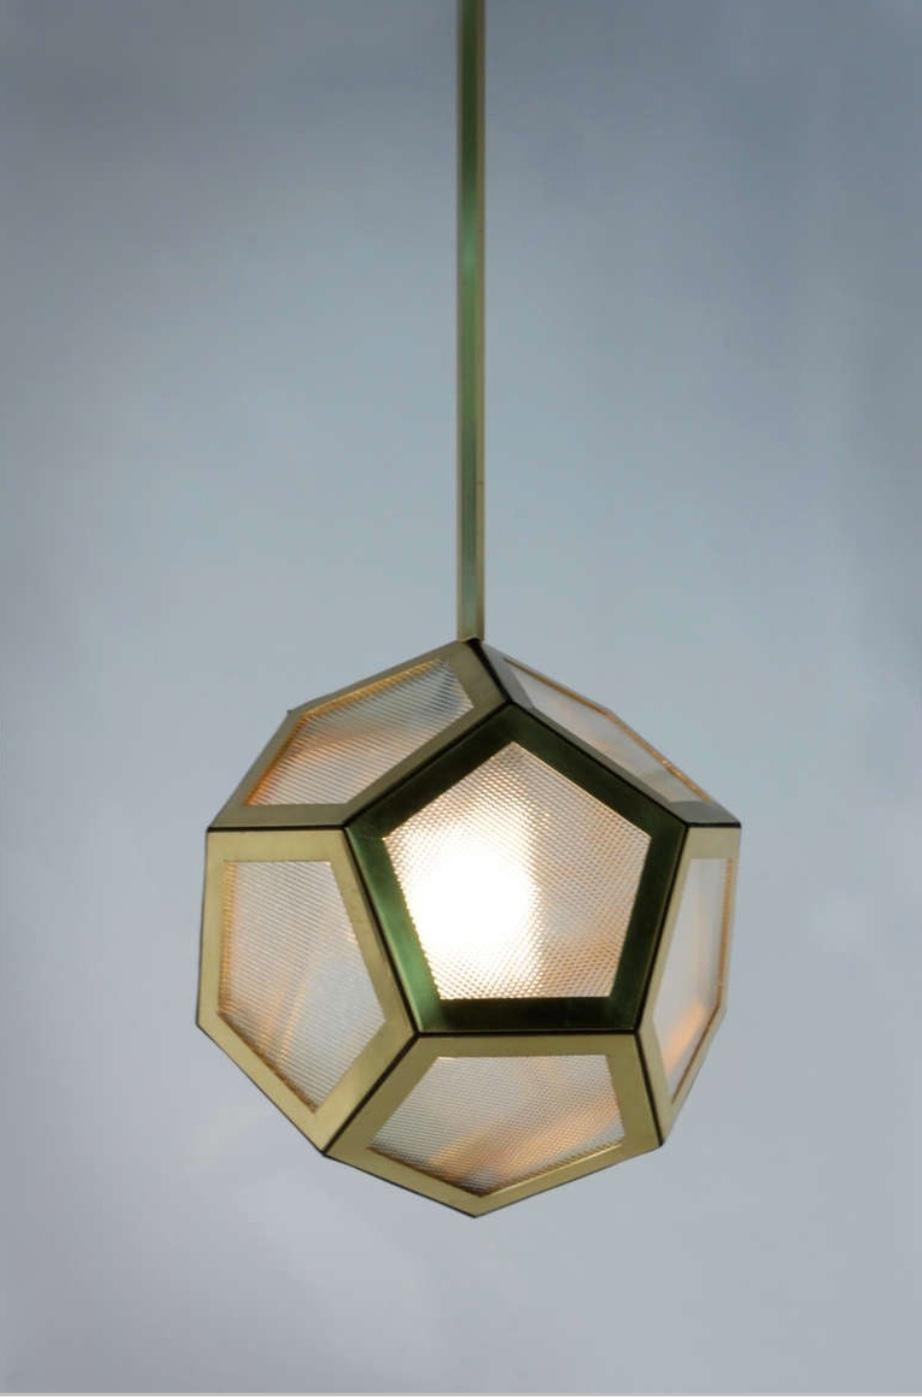 Brass, black leather and industrial glass hanging pentagon lantern. Globe is 15 in. diameter. Current total drop of the fixture is 39 in. (adjustable).